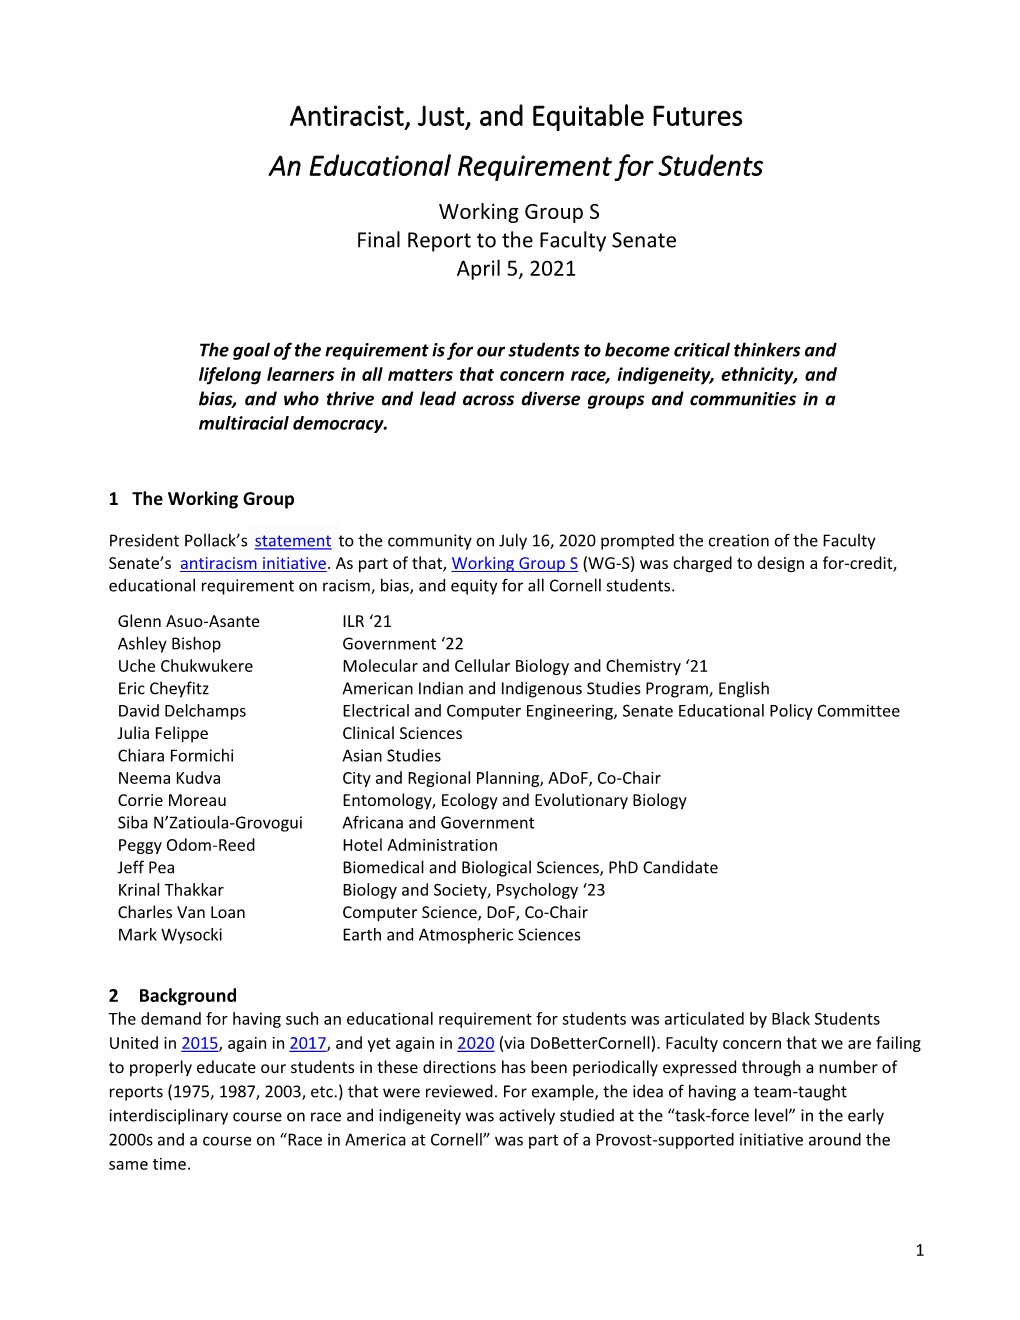 Antiracist, Just, and Equitable Futures an Educational Requirement for Students Working Group S Final Report to the Faculty Senate April 5, 2021